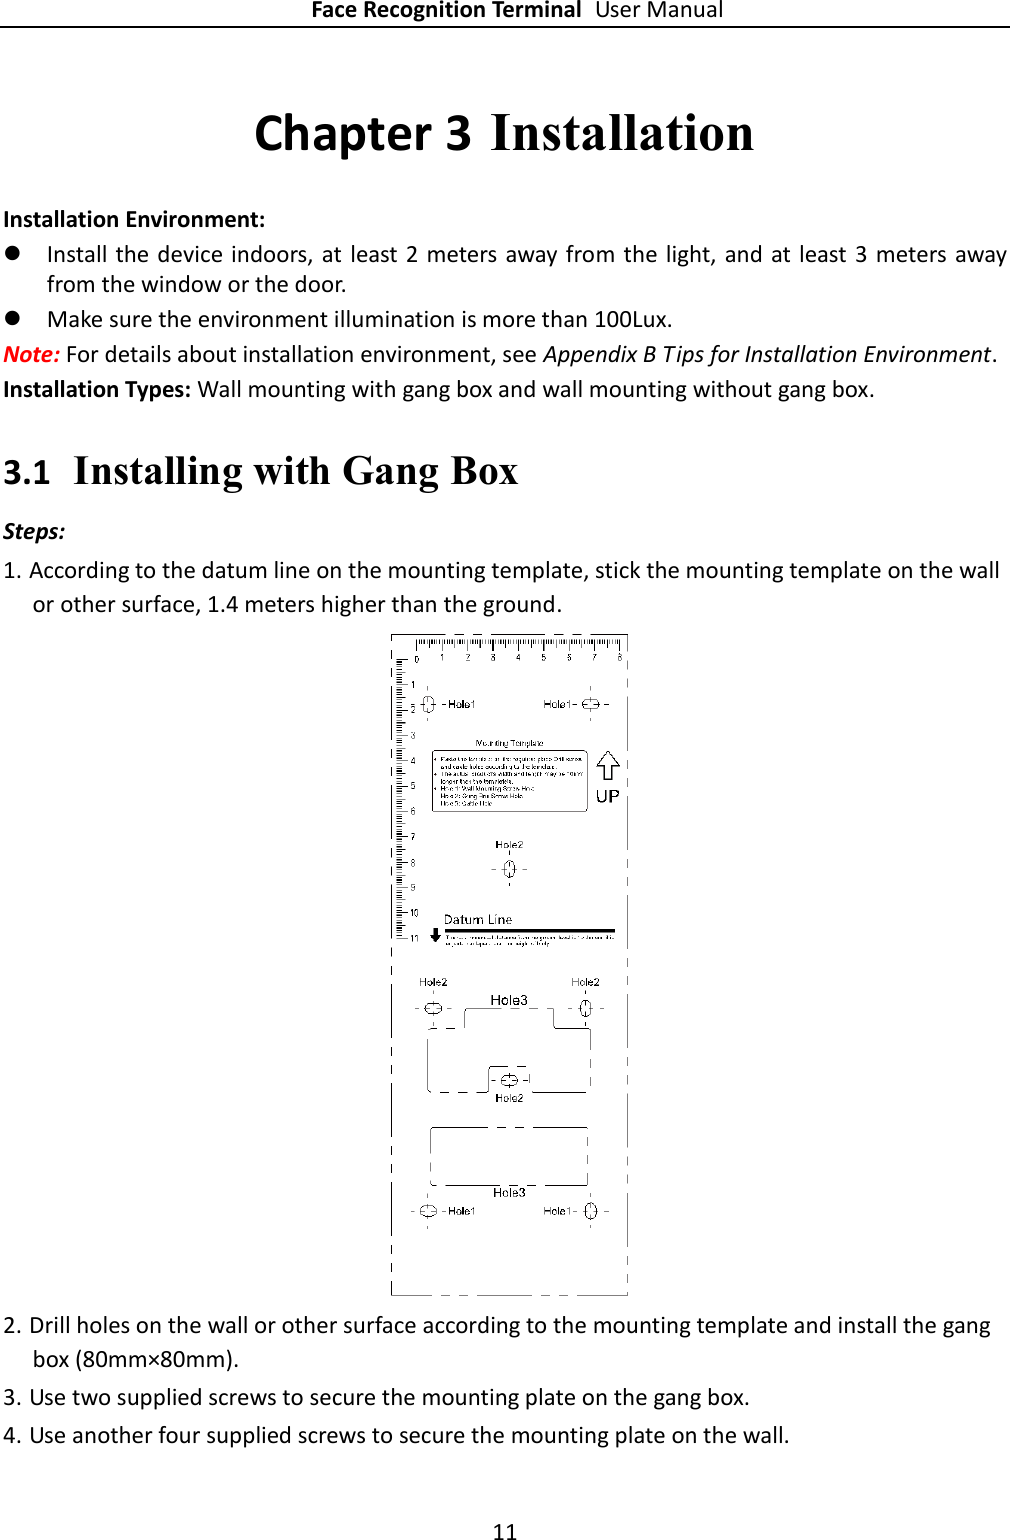 Page 12 of Hangzhou Hikvision Digital Technology K1T604 Face Recognition Terminal User Manual 